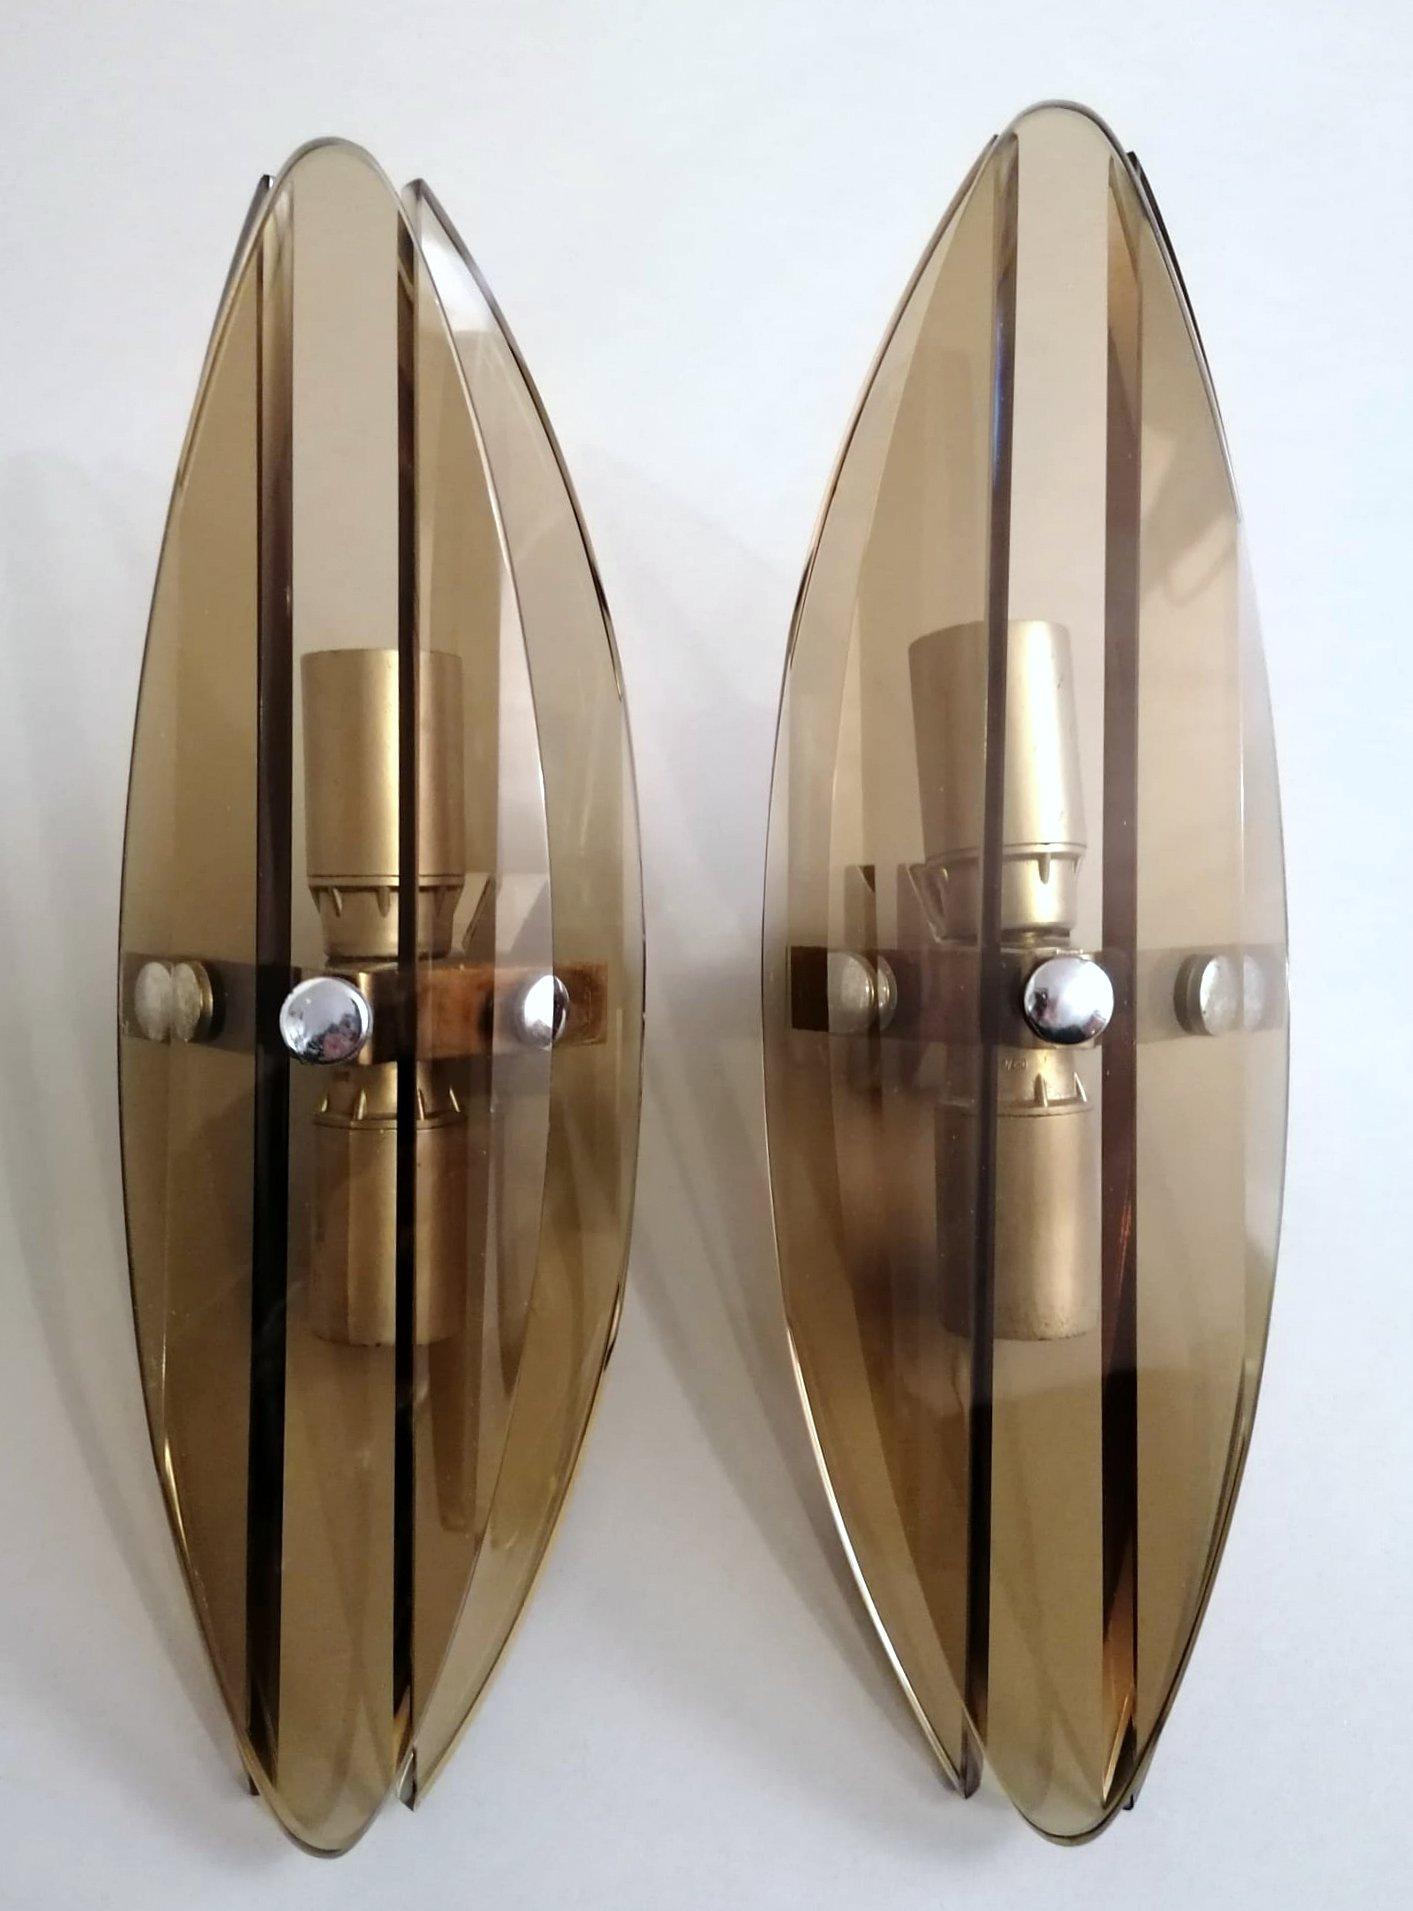 We kindly suggest you read the whole description, because with it we try to give you detailed technical and historical information to guarantee the authenticity of our objects.
Particular pair of vintage Italian wall sconces; the sturdy structure